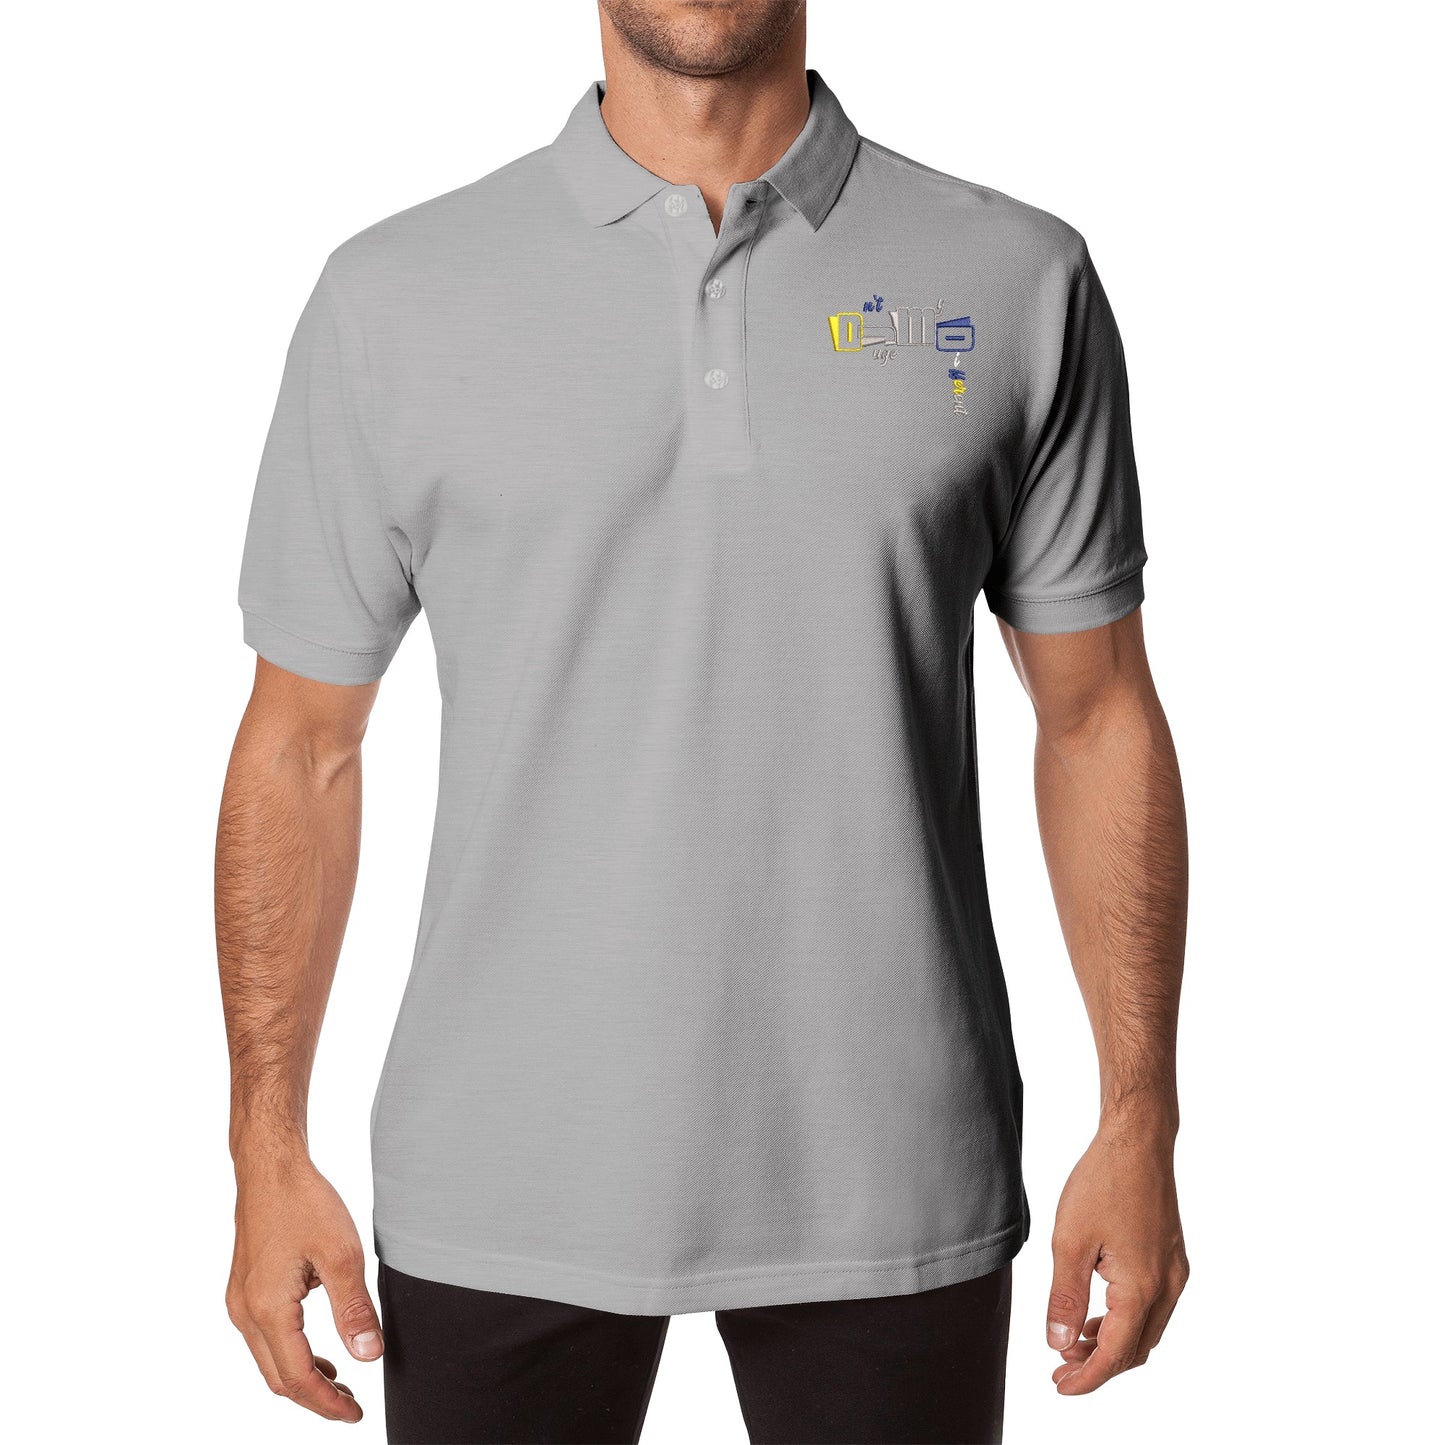 DJMD Embroidered Unisex Cotton Polo Shirt With Logo